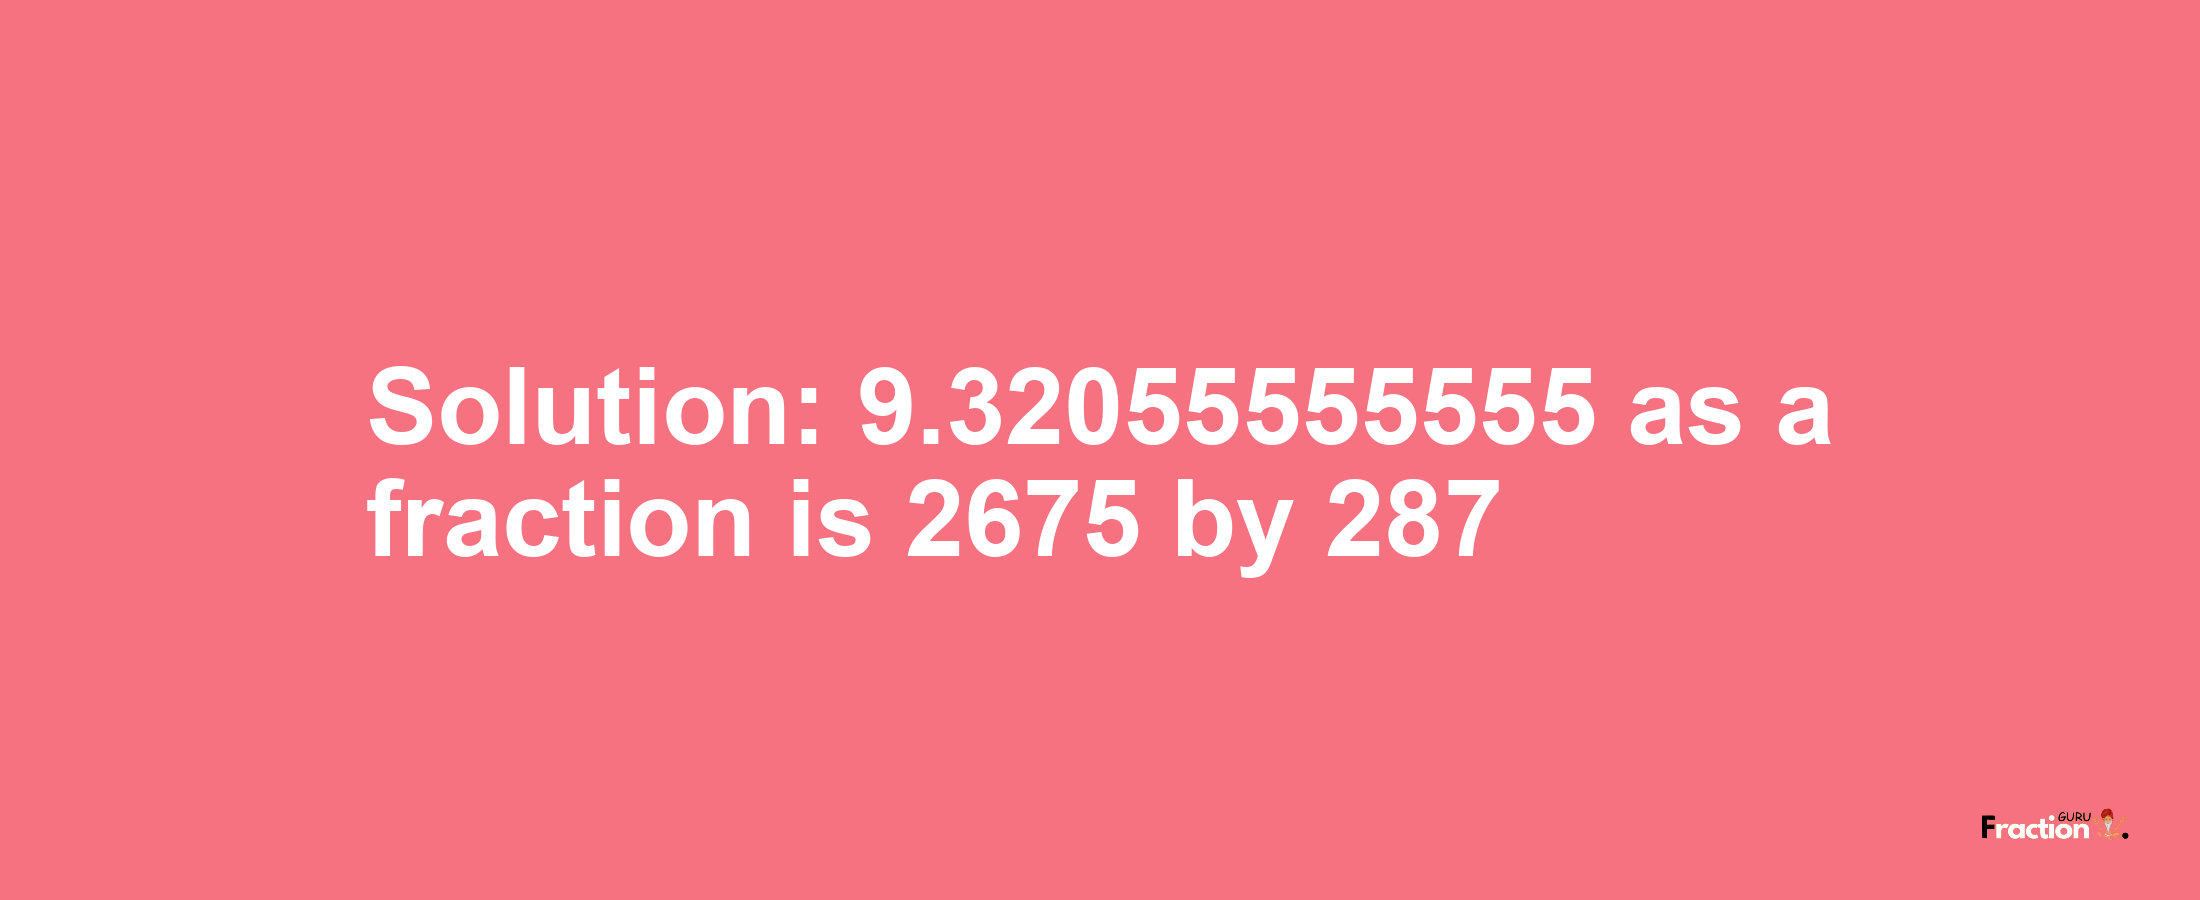 Solution:9.32055555555 as a fraction is 2675/287